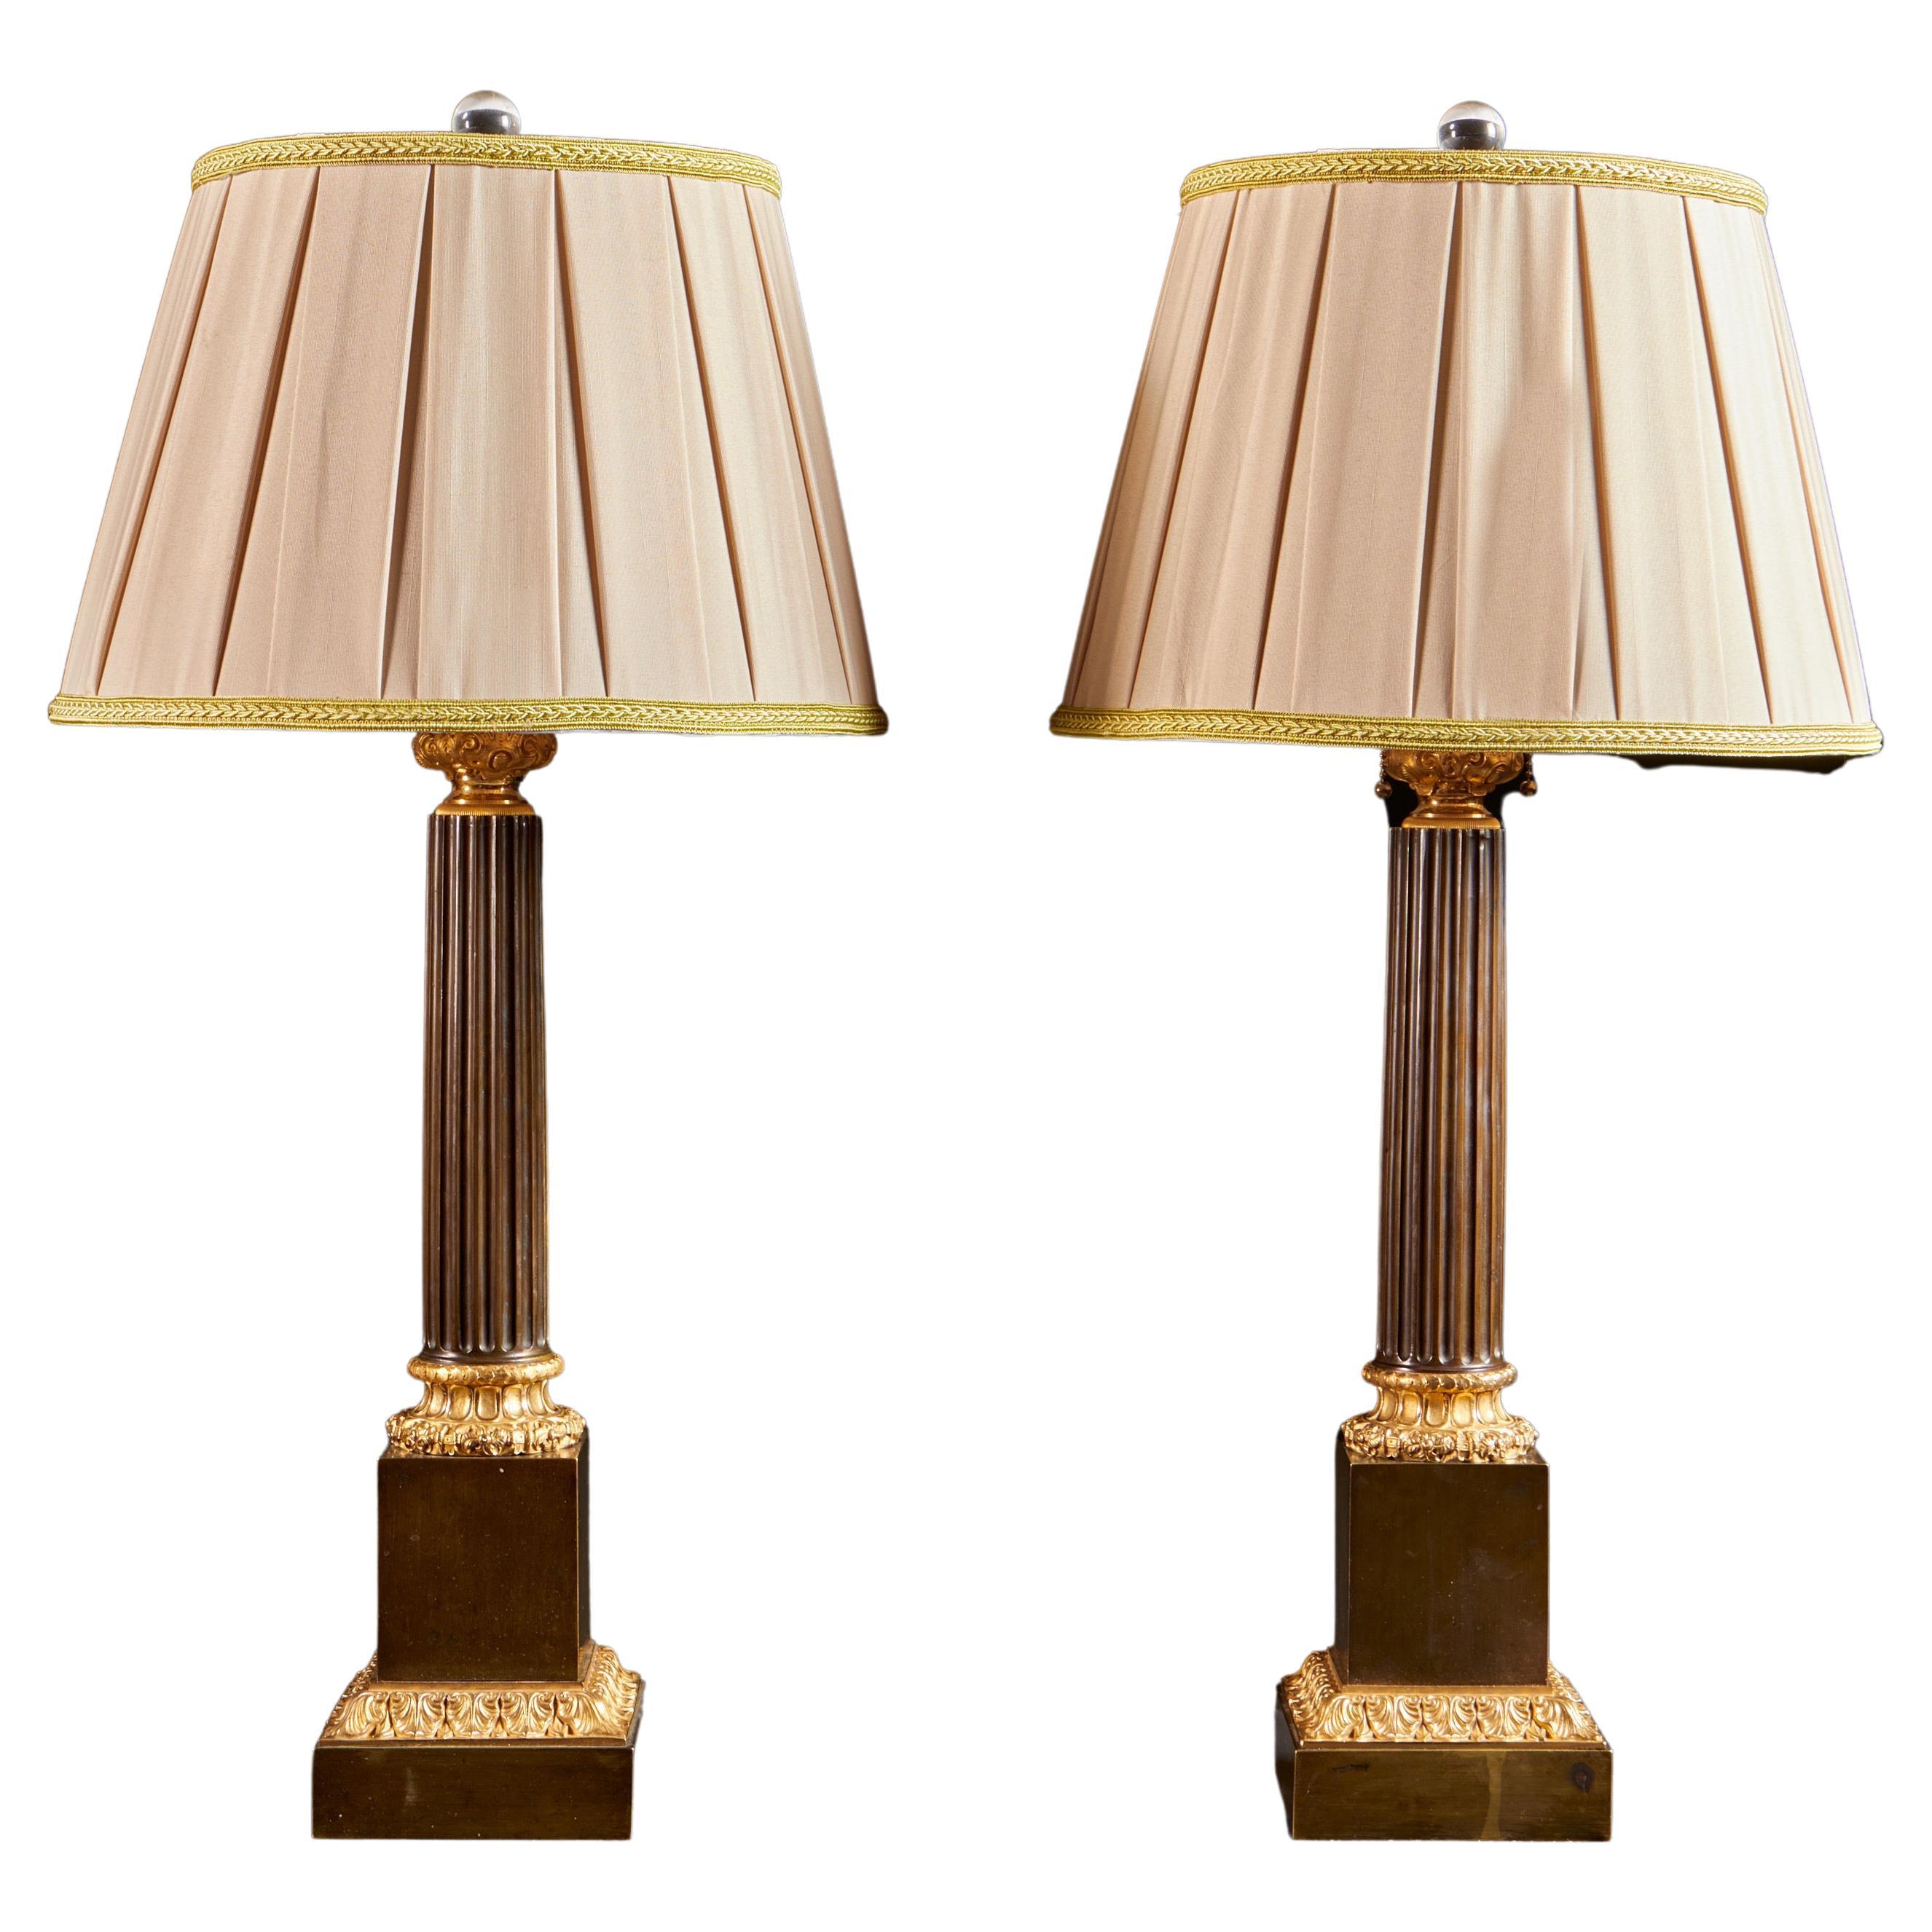 19th Century French Bronze and Ormolu Carcel Table Lamps For Sale